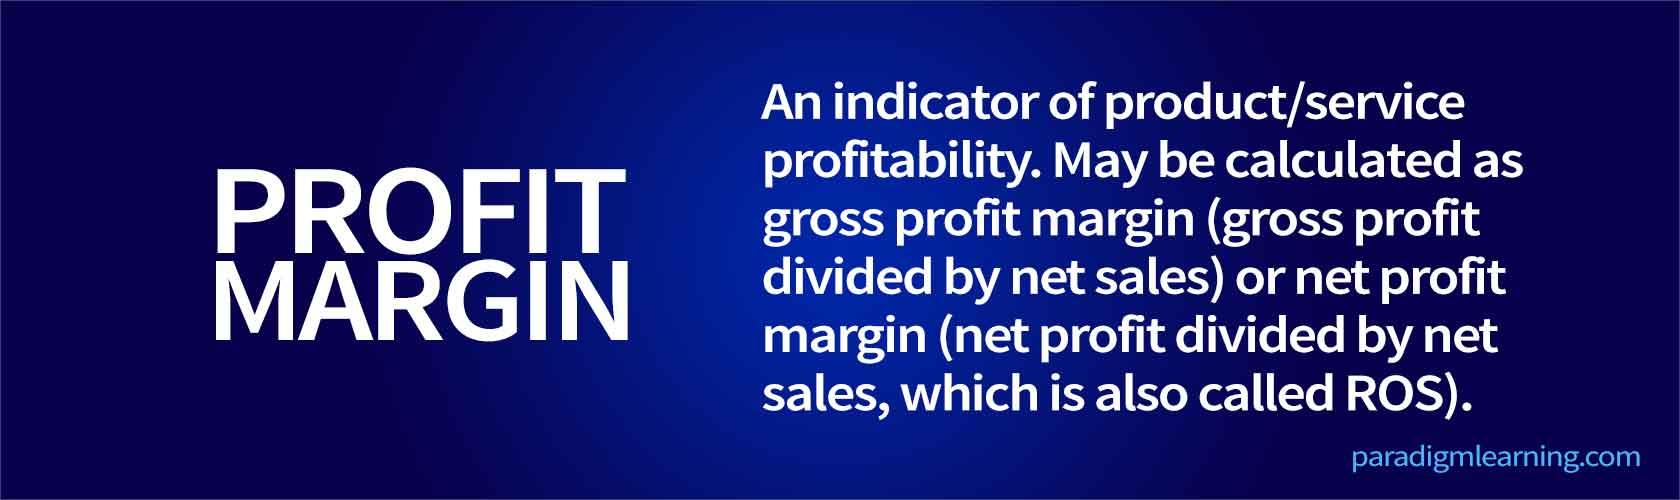 An indicator of product/service profitability. May be calculated as gross profit margin (gross profit divided by net sales) or net profit margin (net profit divided by net sales, which is also called ROS)